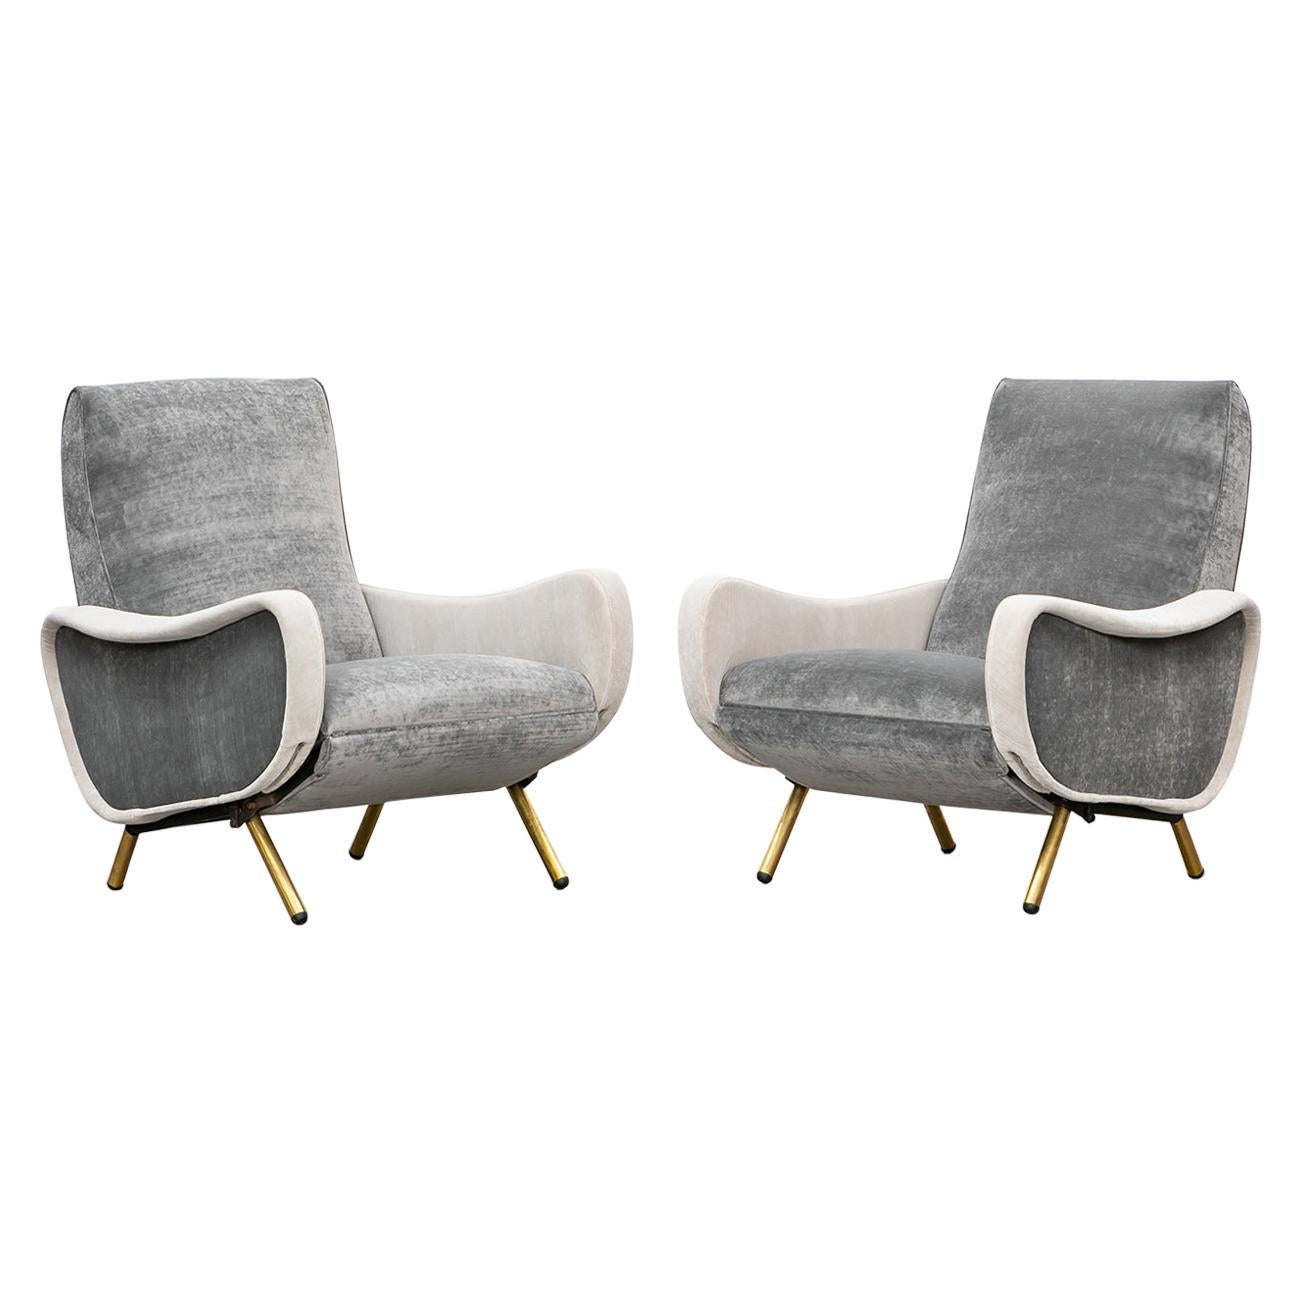 1950s New Upholstery in Grey, Brass Legs, Pair of Lounge Chairs by Marco Zanuso